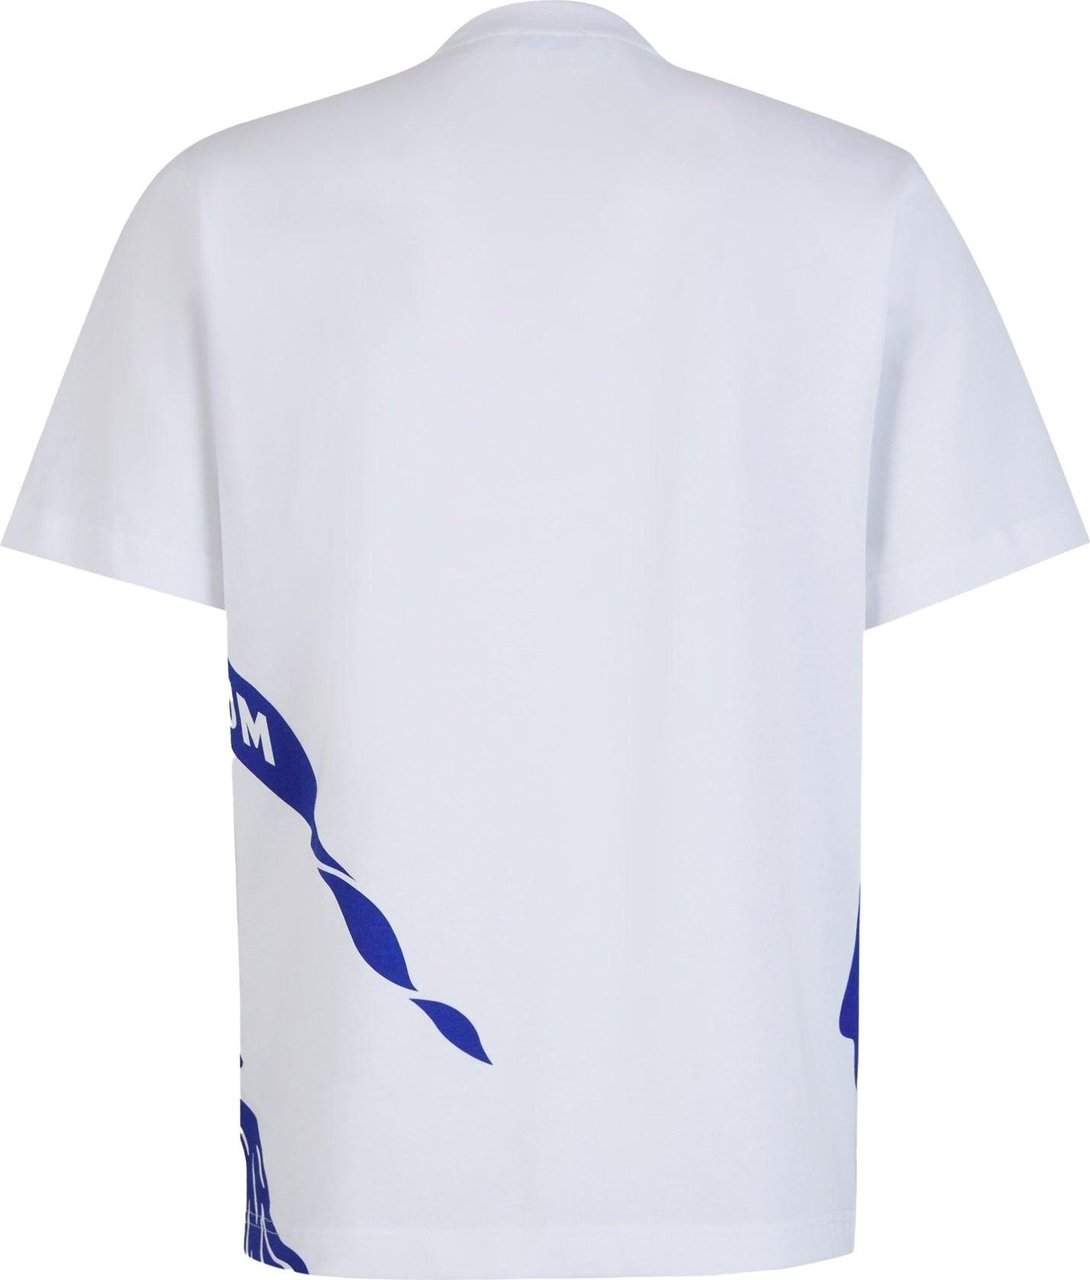 Burberry Printed Cotton T-shirt Divers